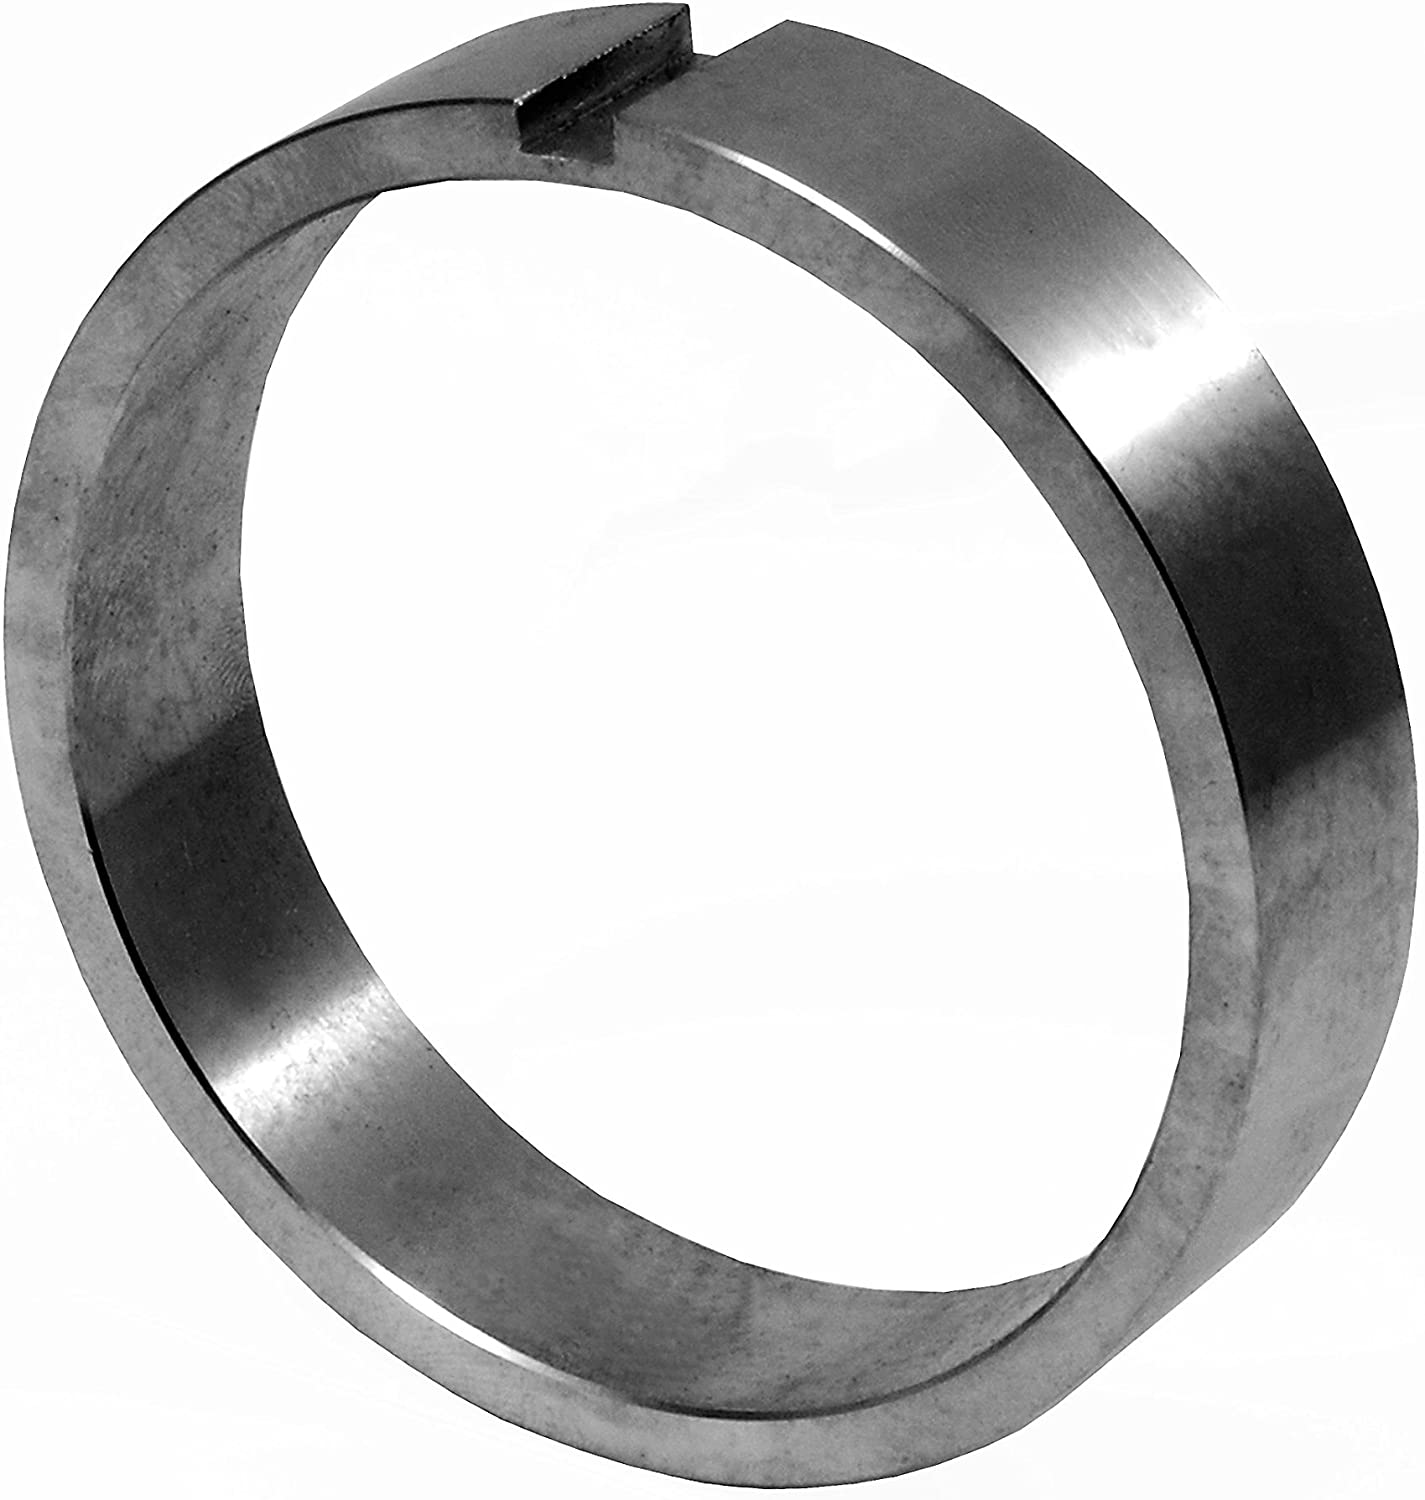 WolfCut Insert ring for Unger Meat Mincing Machine Size H82 Slim 18.0 mm Stainless Steel